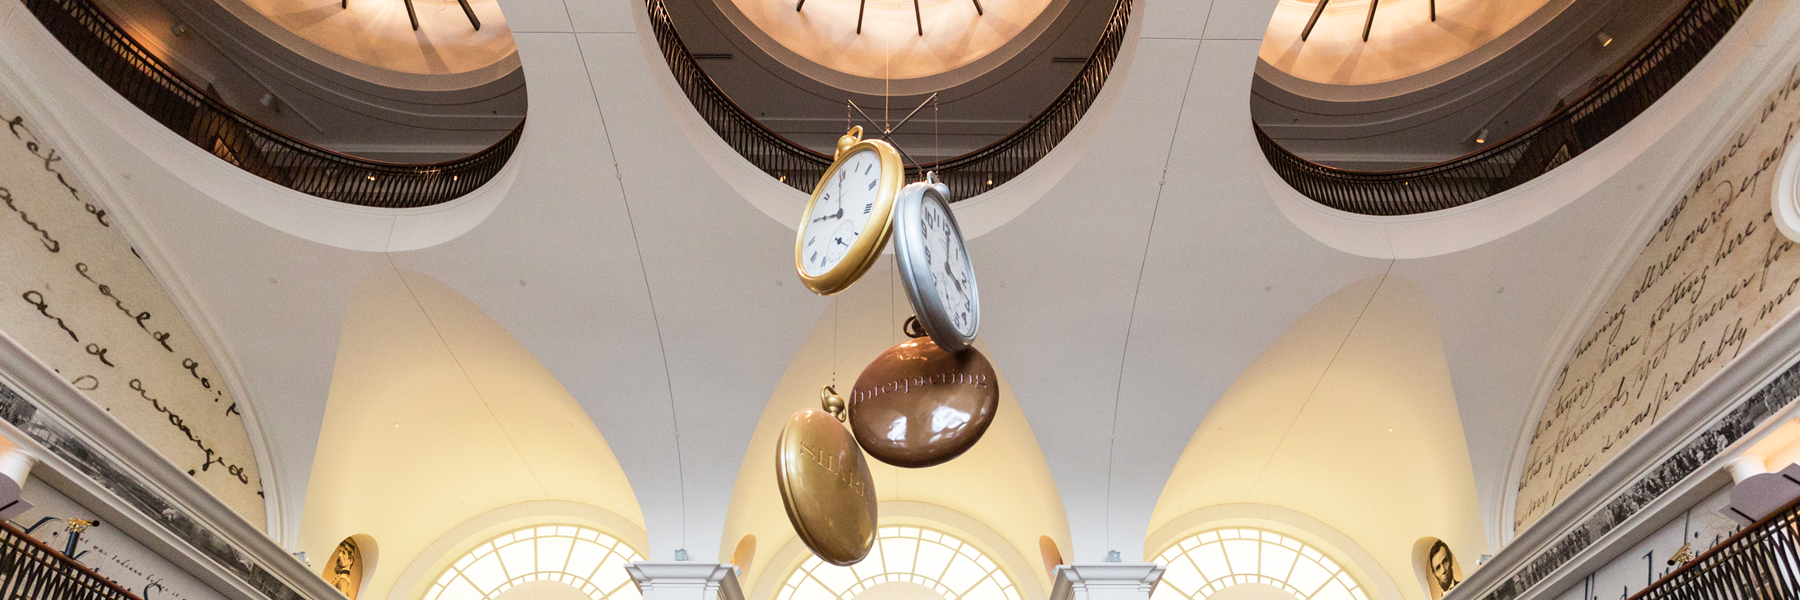 Clocks hanging from a ceiling.